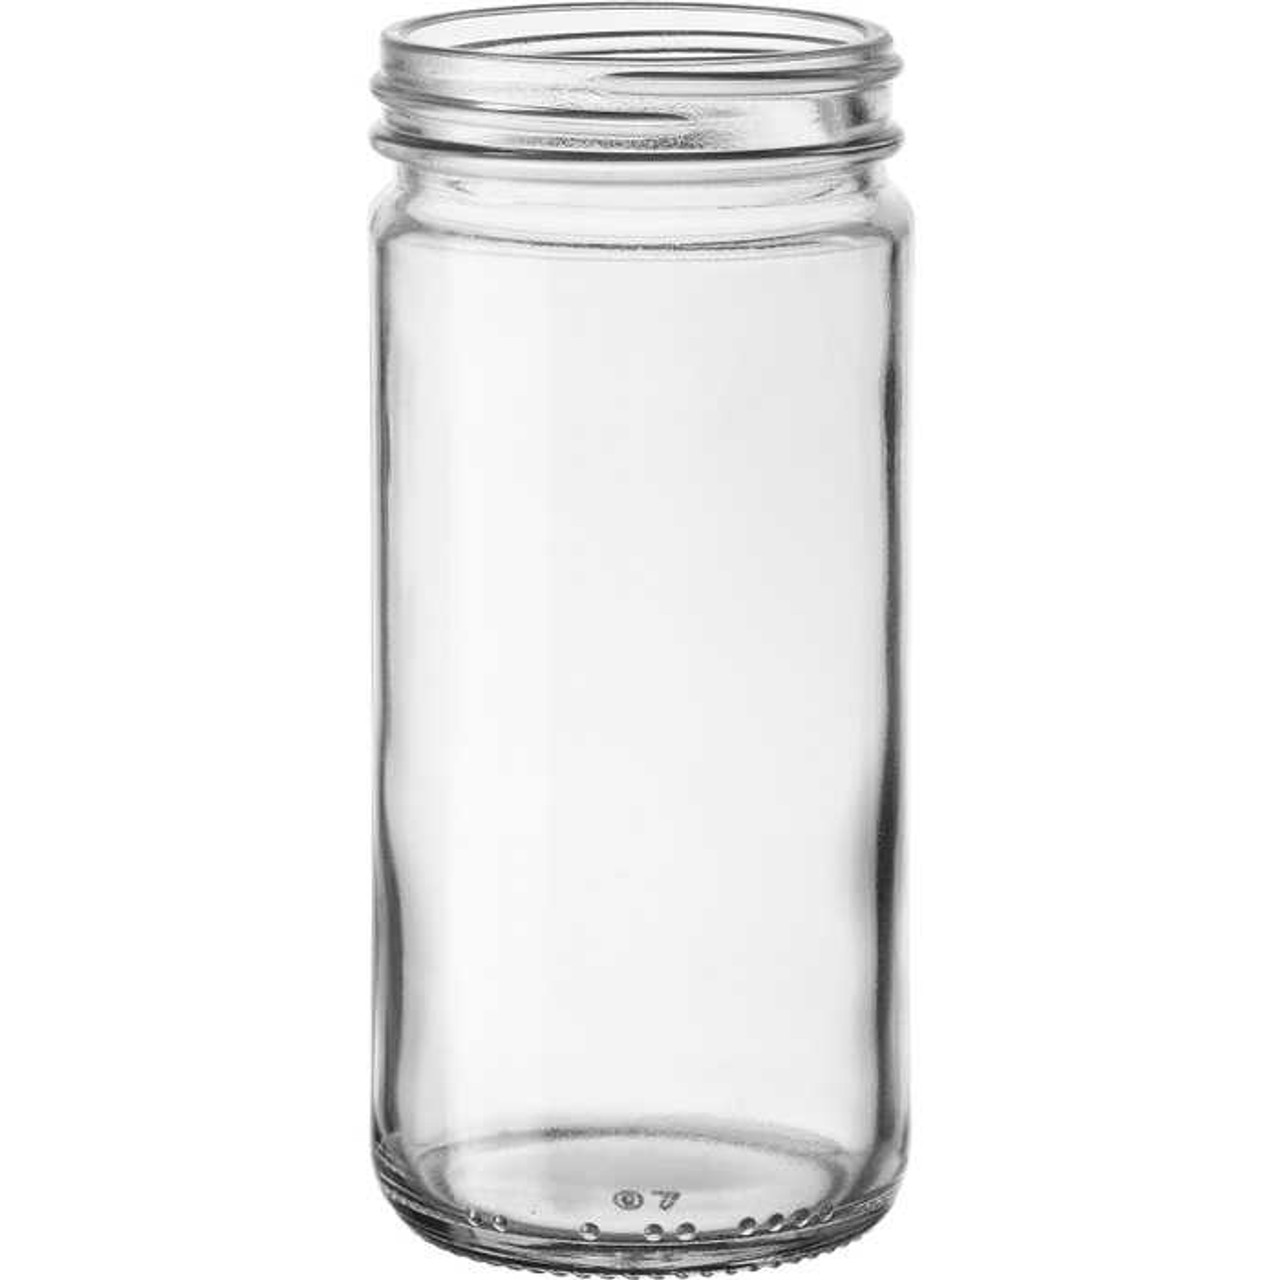 https://cdn11.bigcommerce.com/s-1ybtx/images/stencil/1280x1280/products/1072/6314/8-oz-Glass-Paragon-Jar-with-Gold-Lid-58400-Closure_5016__64478.1699988723.jpg?c=2?imbypass=on